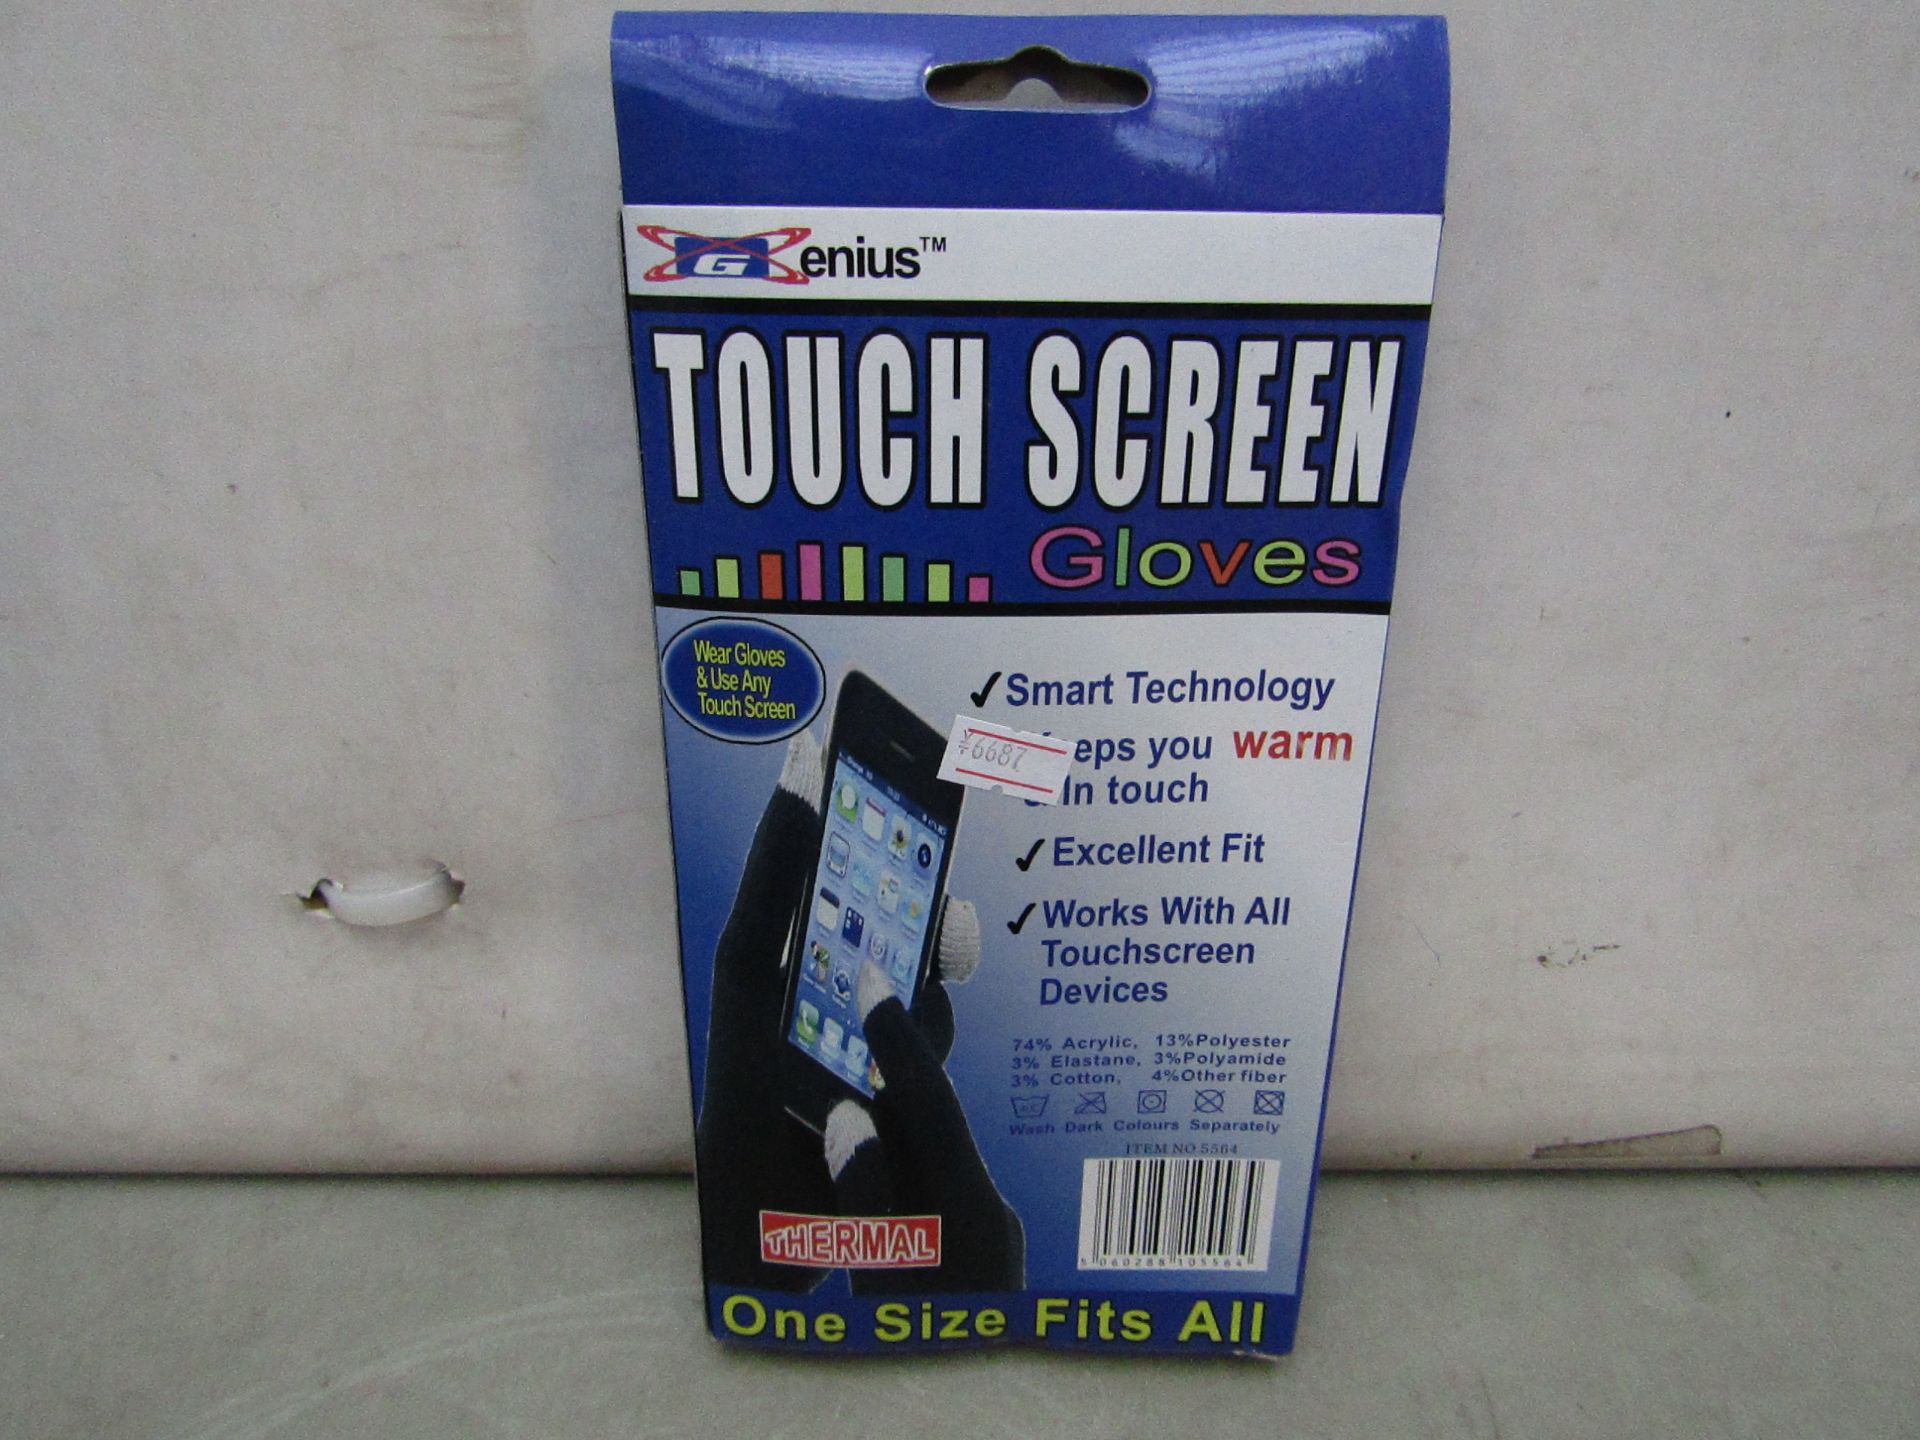 5x Genius - Touch Screen Gloves (Smart Technology, Works With Al Touchscreen Devices) - One Size